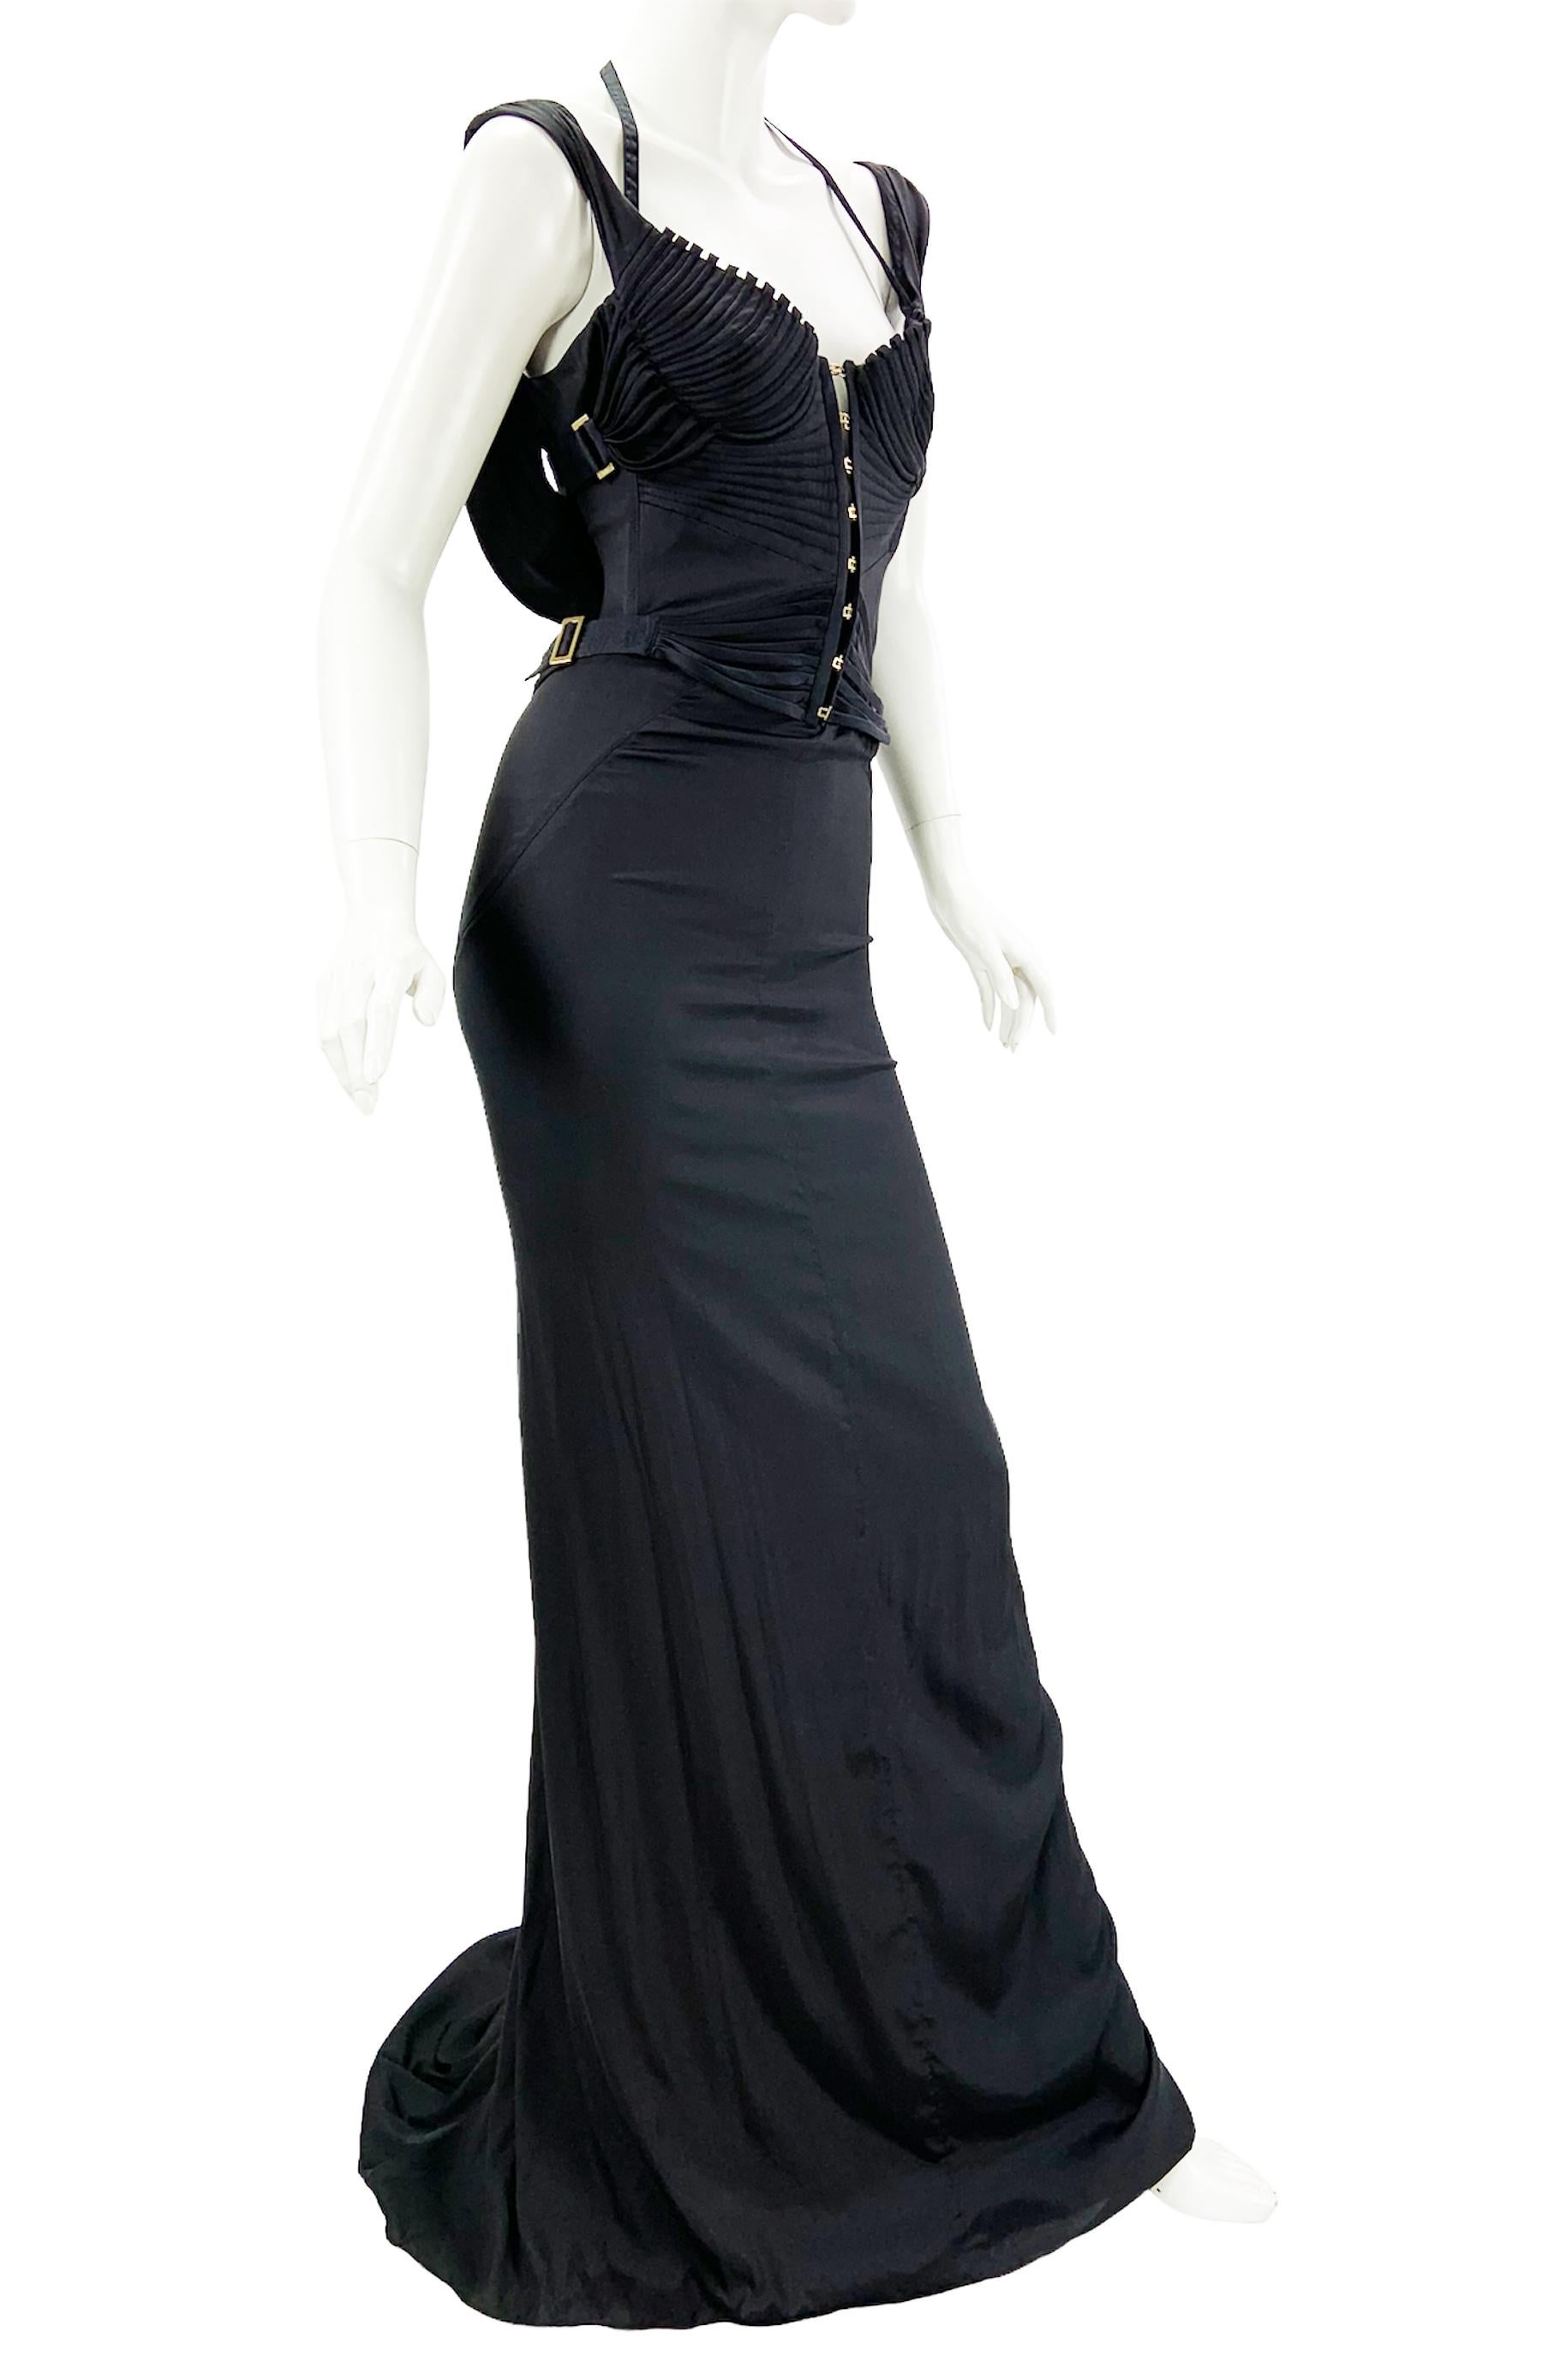 Women's Iconic Tom Ford for Gucci F/W 2003 Runway Black Corset Stretch Dress Gown 38 For Sale